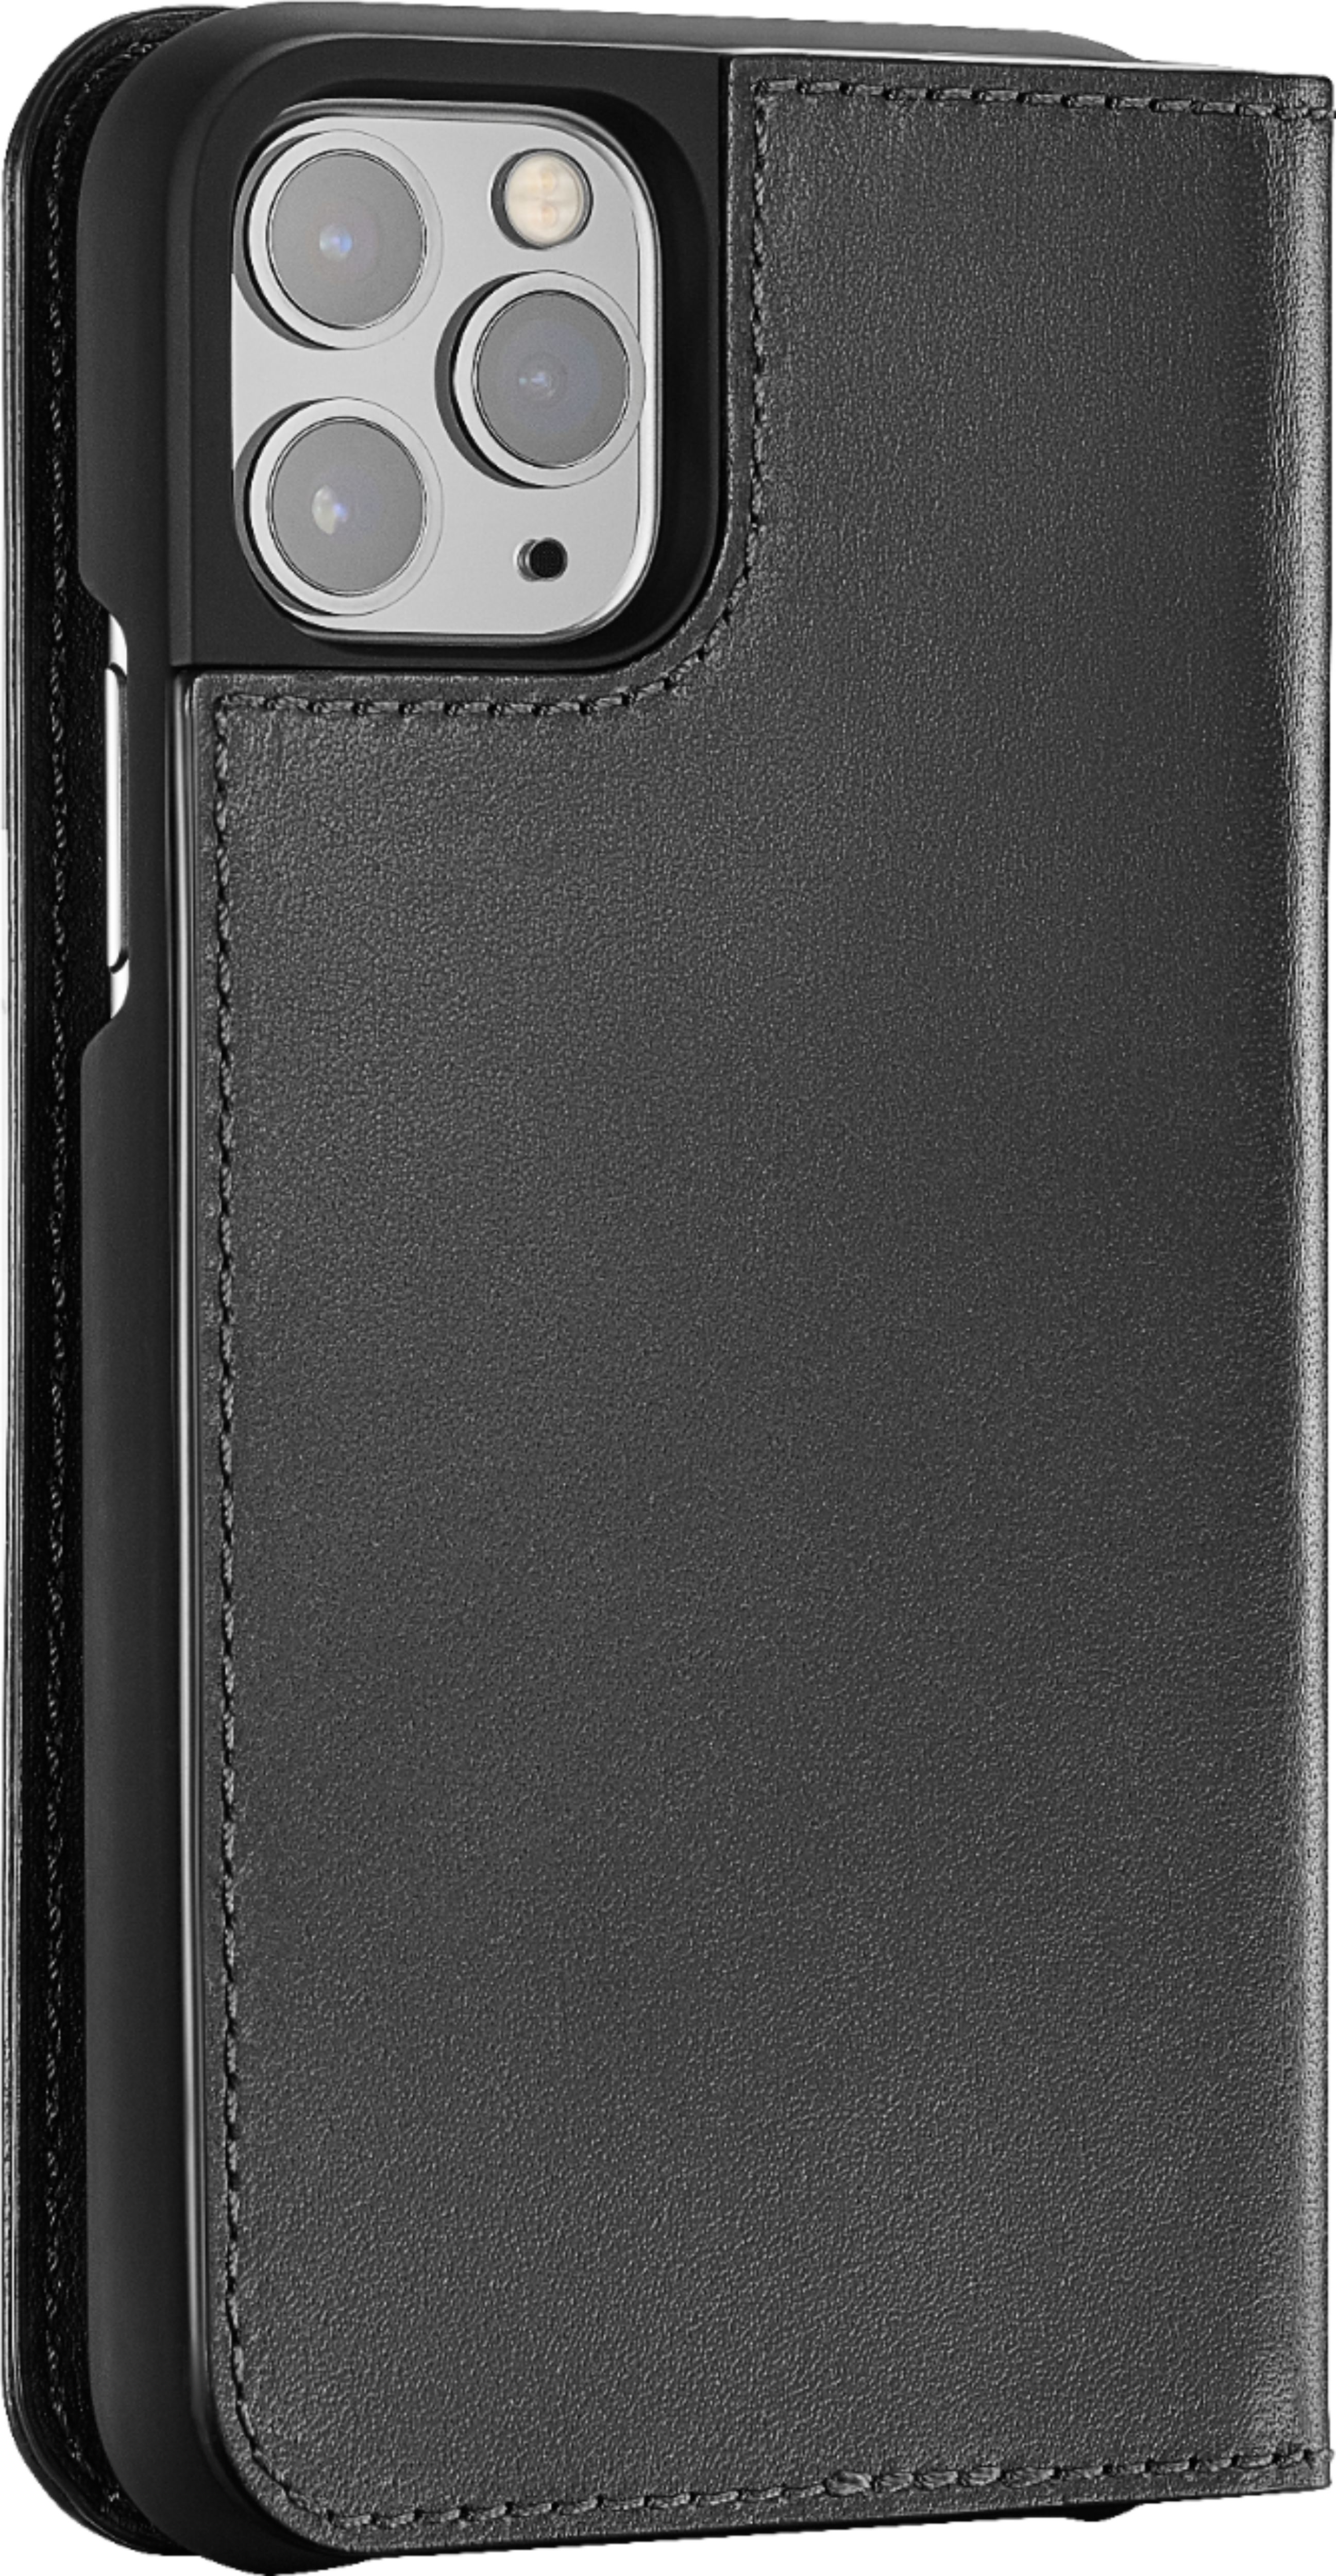 Leatherskin Case for iPhone 11 Pro Max (Black) - SFD447NPUS-50